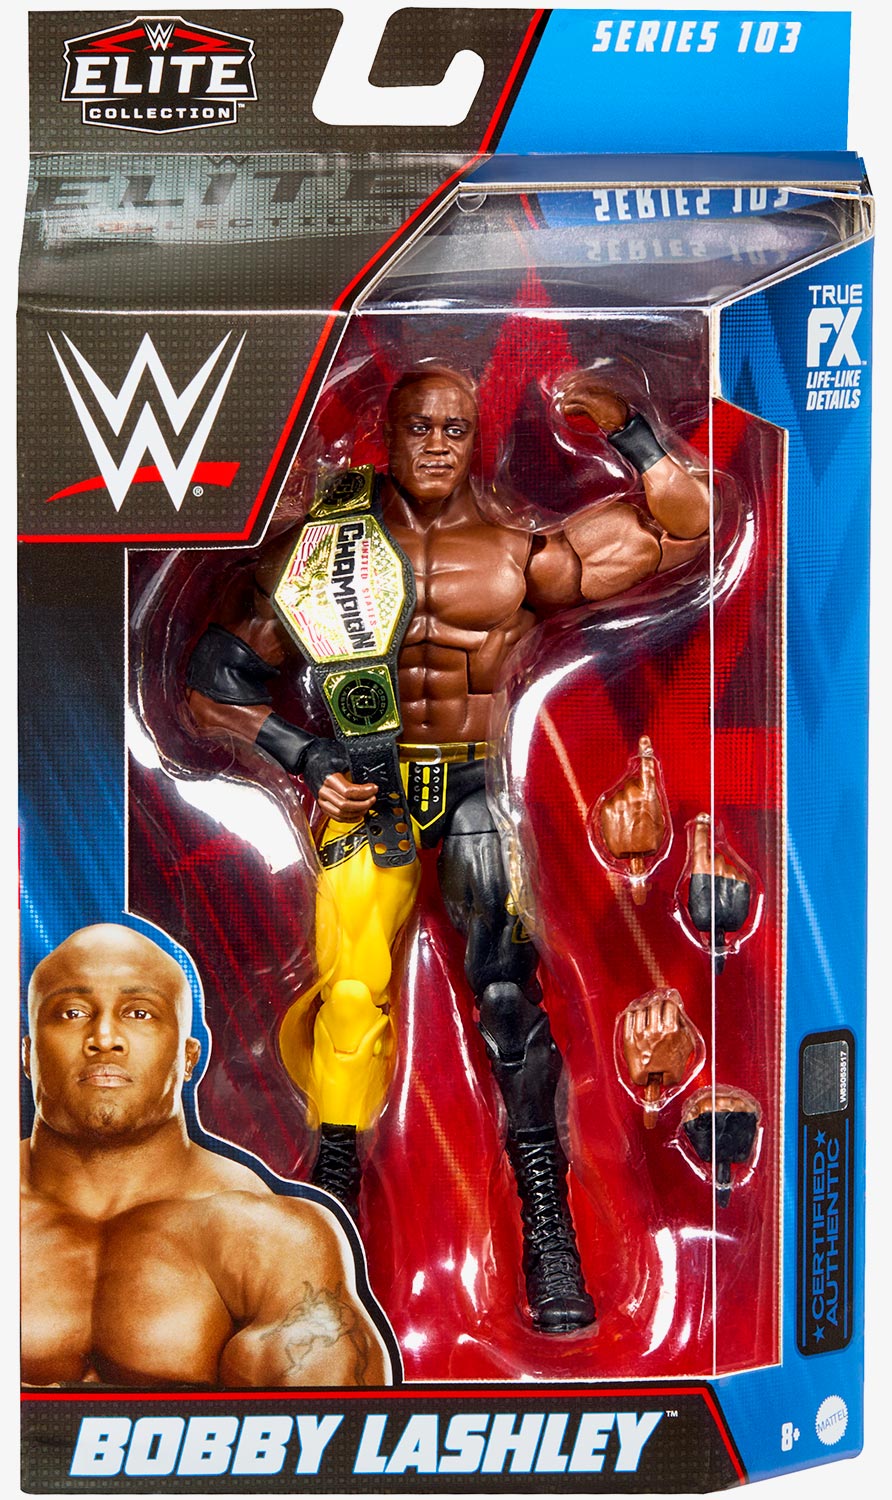 Bobby Lashley WWE Elite Collection Series #103 Action Figure – 